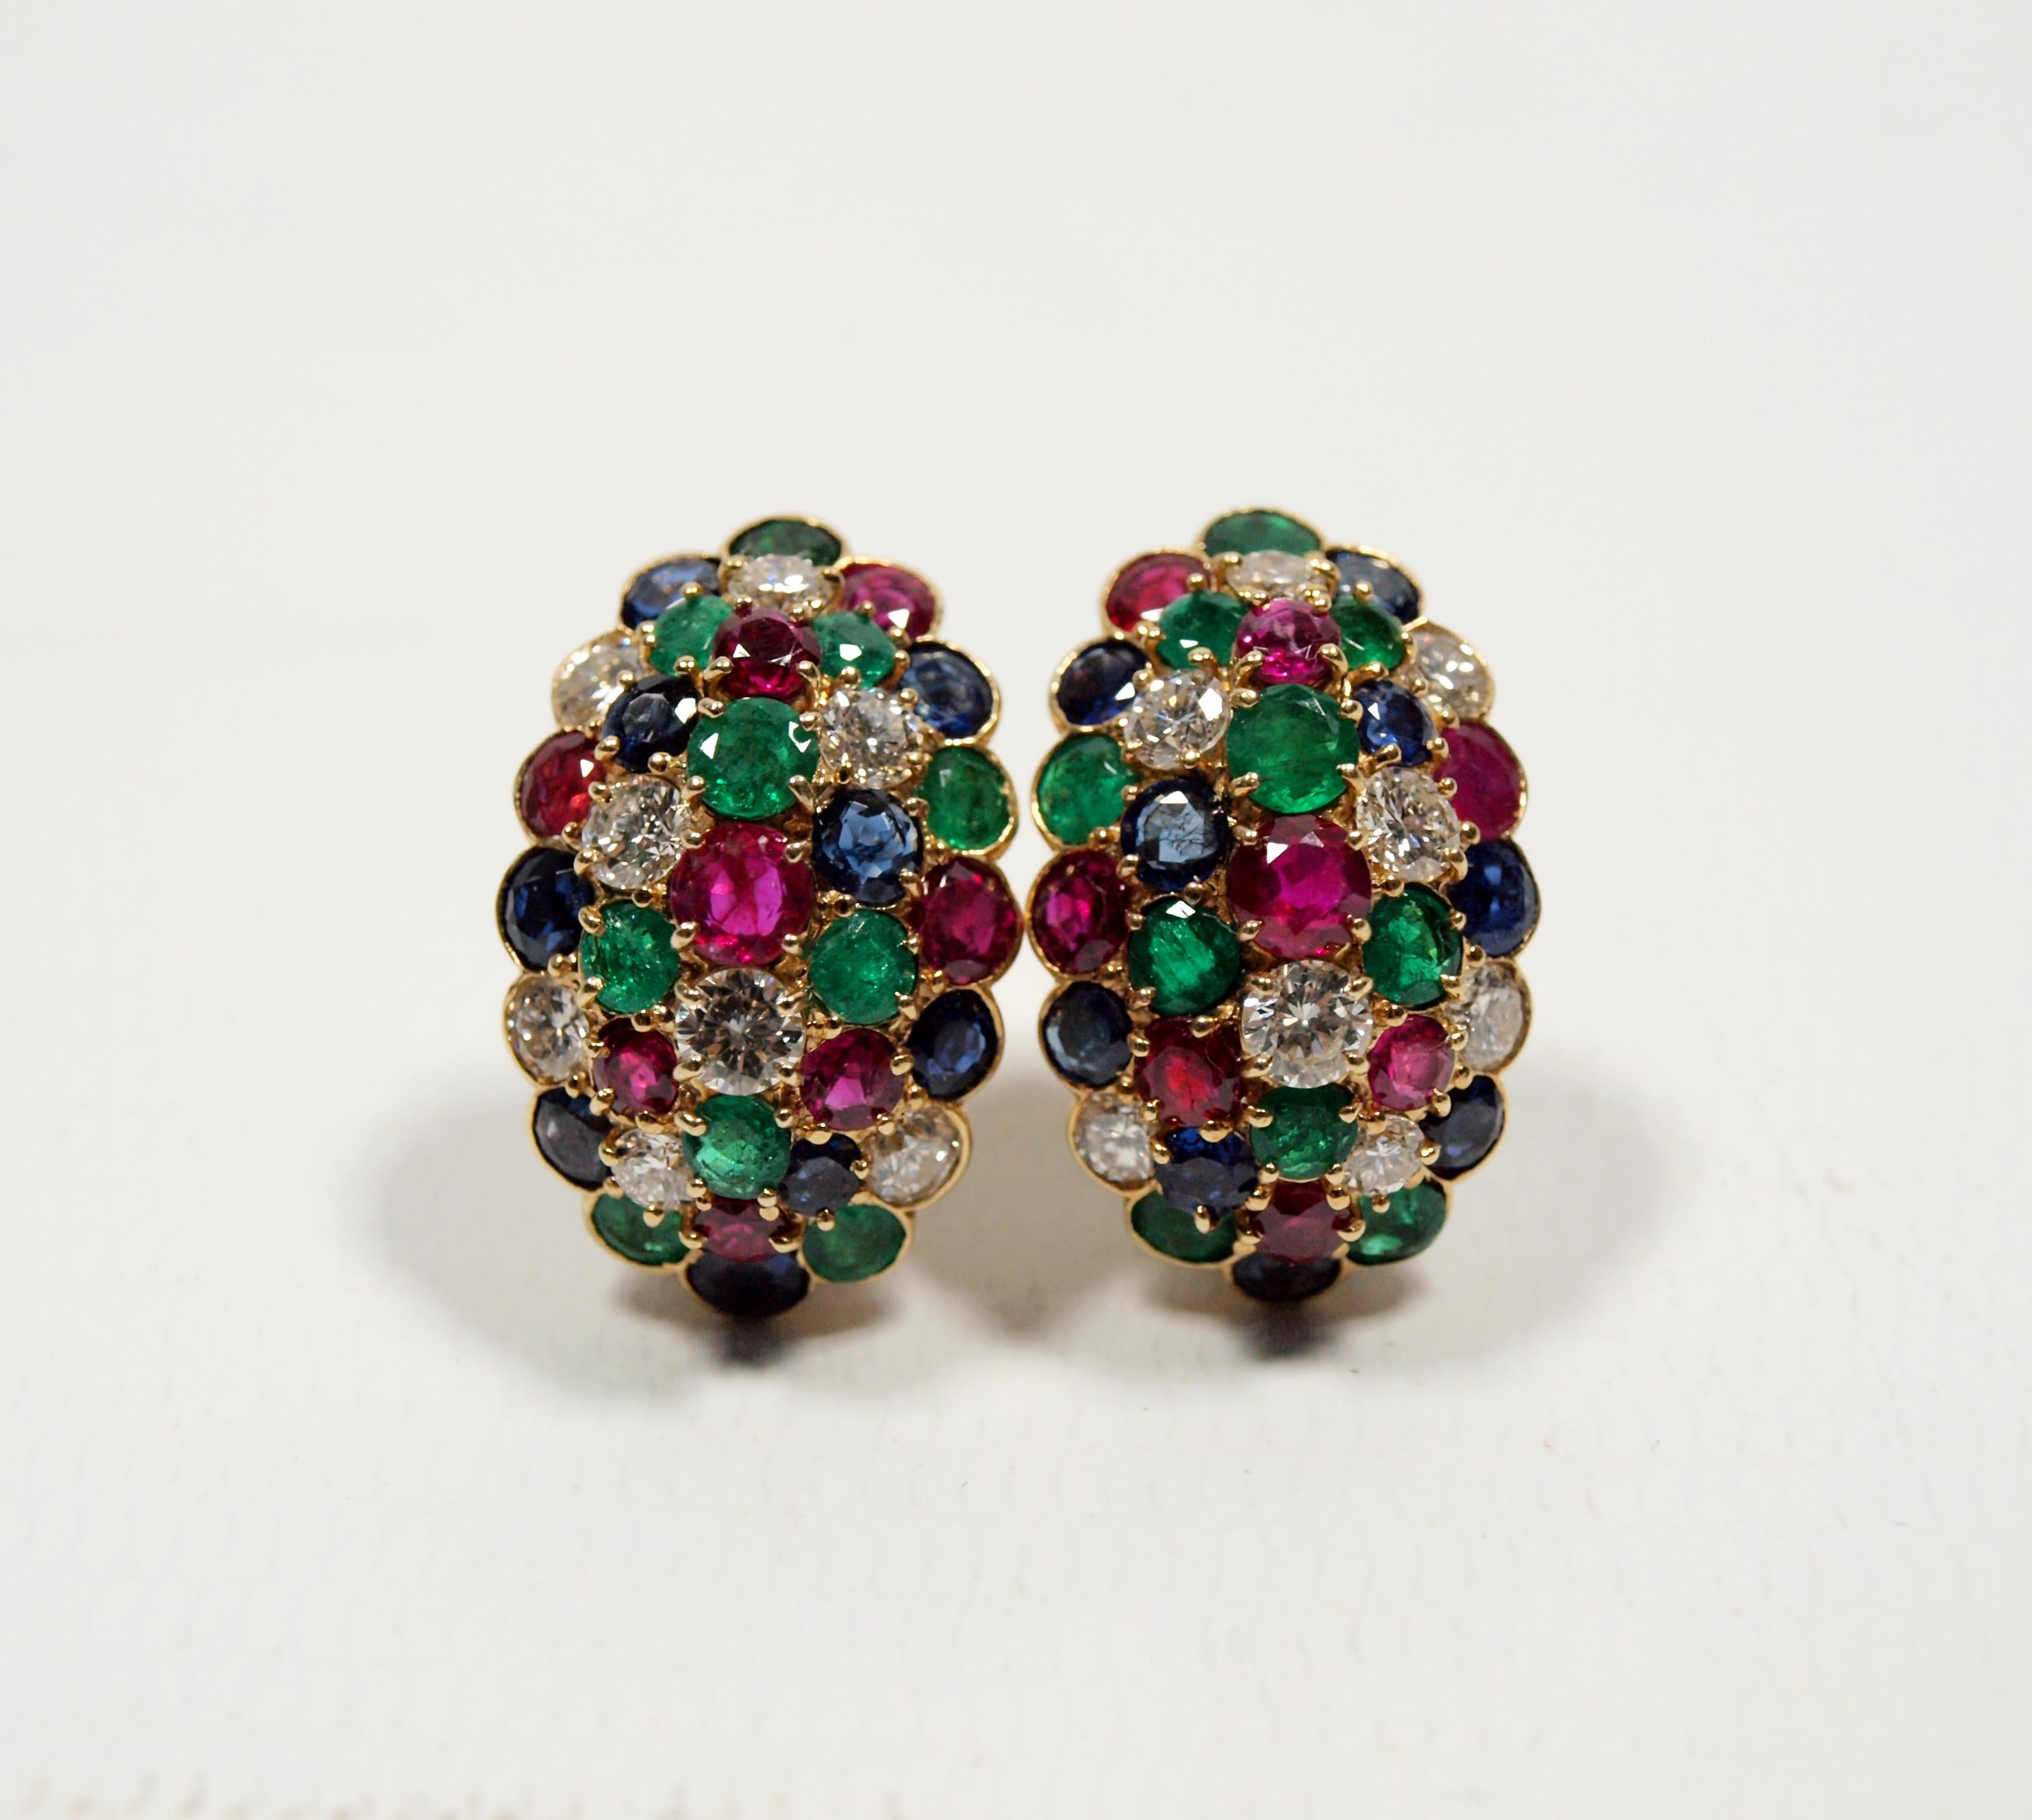 A pair of Van Cleef & Arpels yellow gold, diamond, ruby, sapphire and emerald earclips,
containing eight round brilliant cut diamonds weighing approximately 1.15 carats total, eight round mixed cut rubies measuring approximately 2.40-4.00 mm in